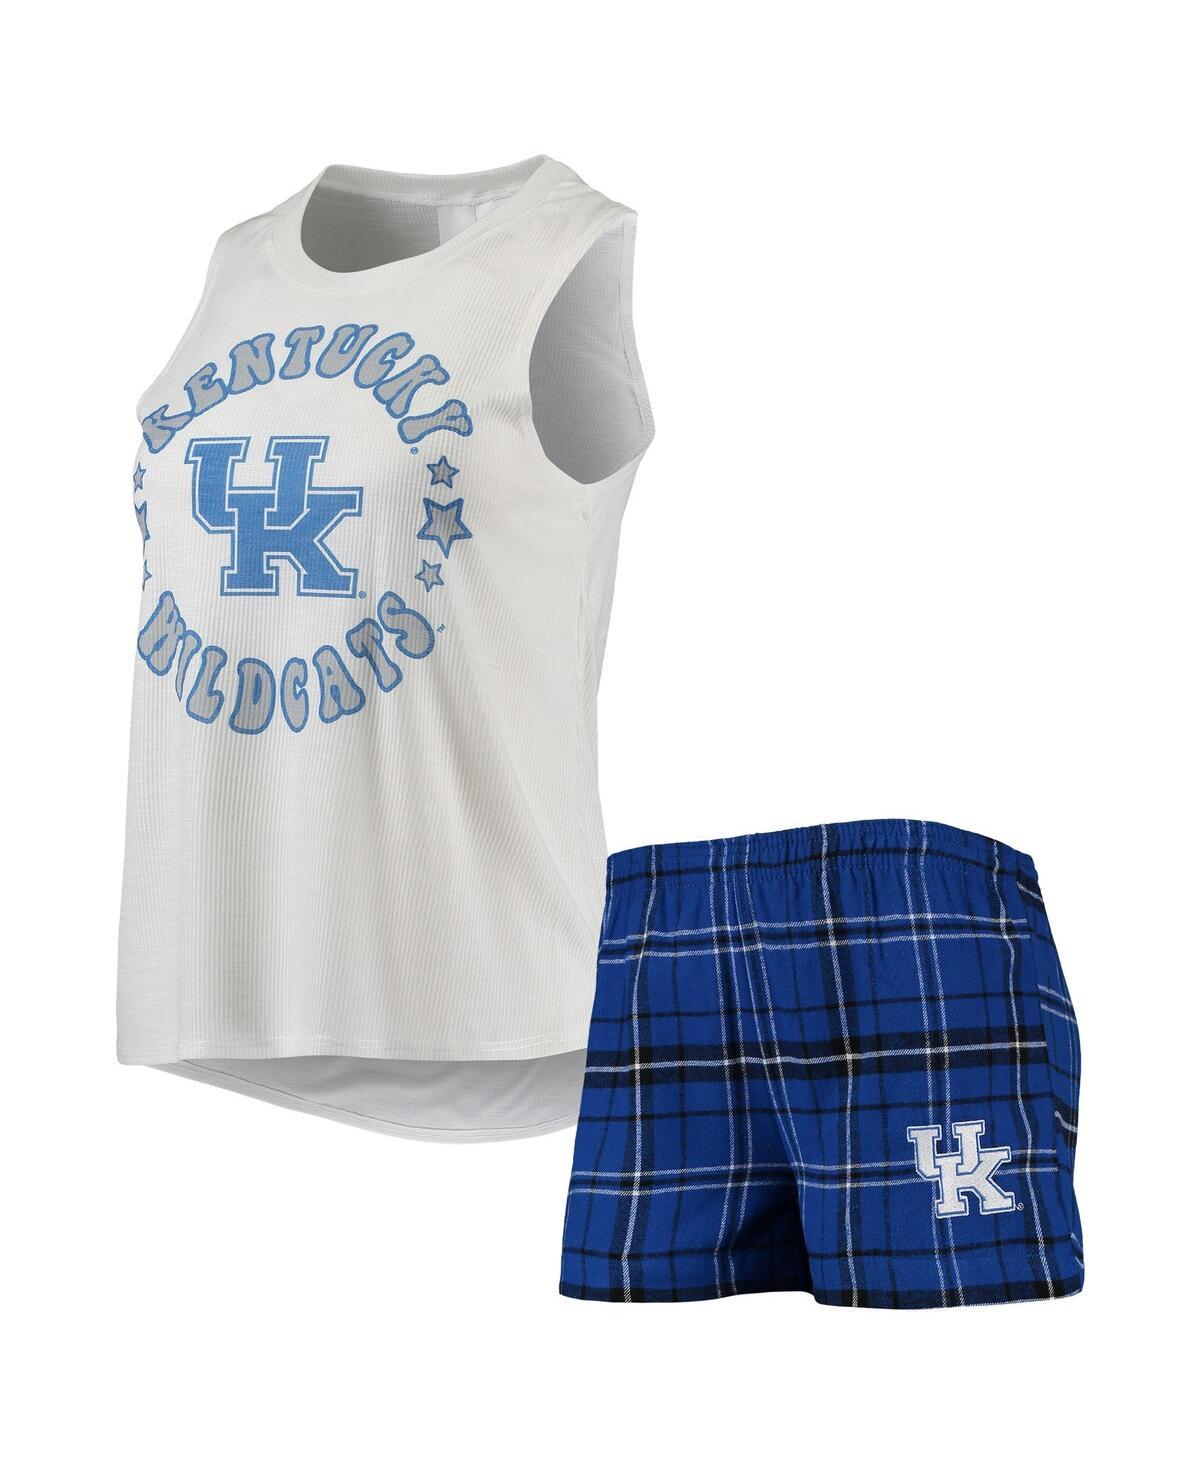 Women's Concepts Sport Royal, White Kentucky Wildcats Ultimate Flannel Tank Top and Shorts Sleep Set - Royal, White